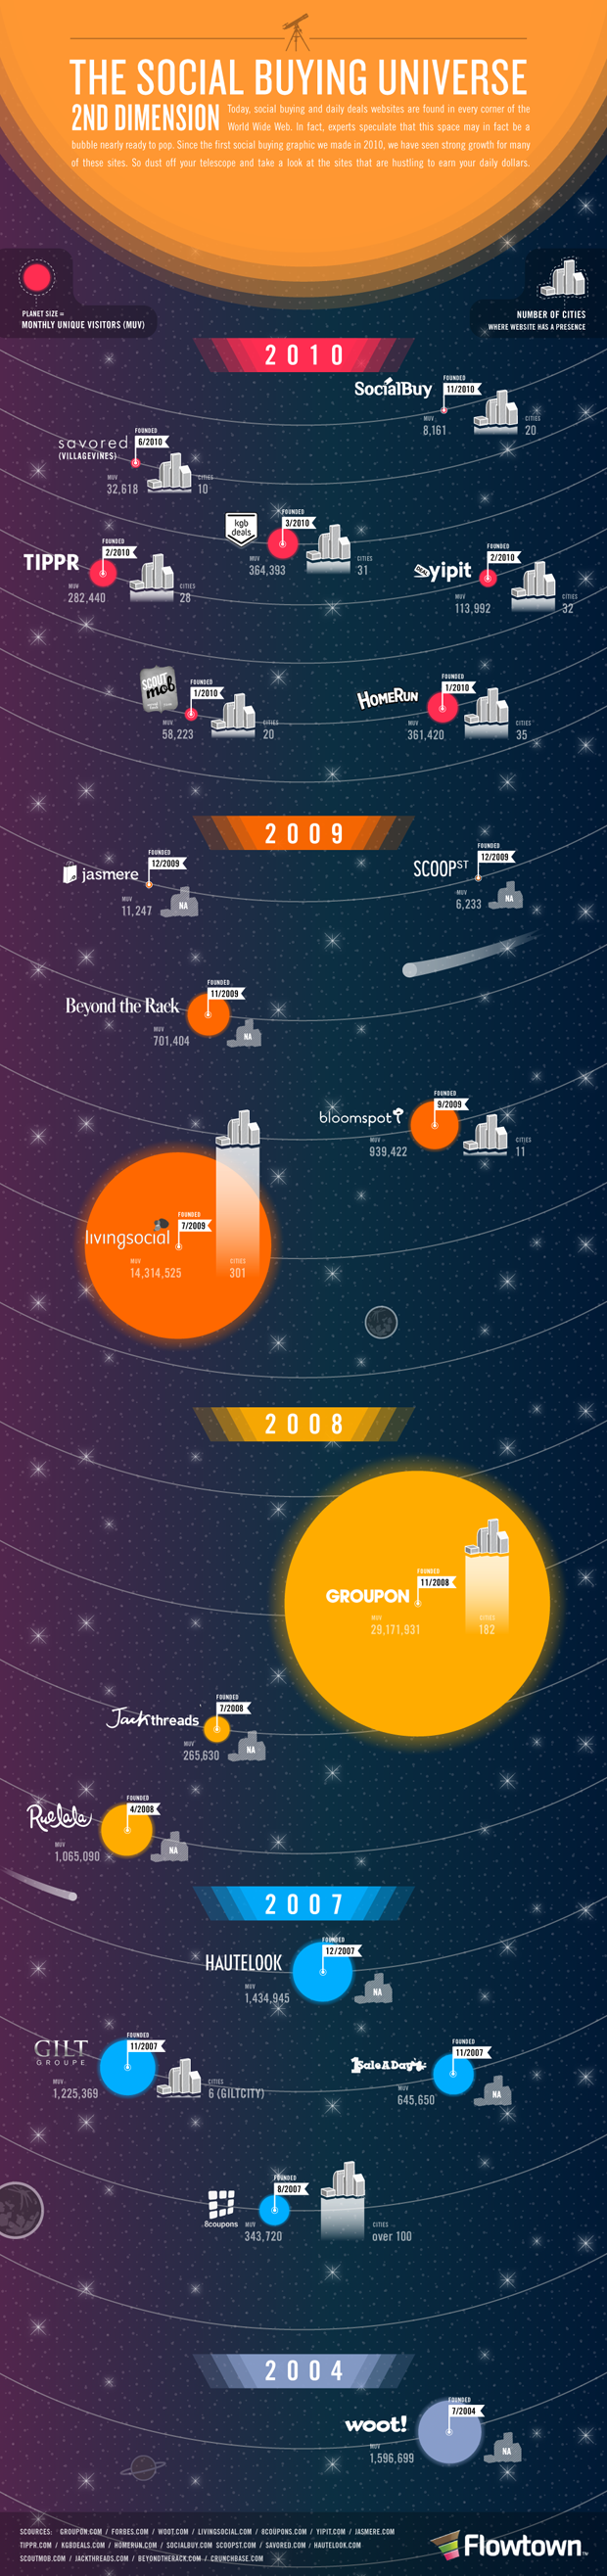 The US Group Buying Universe [Infographic]